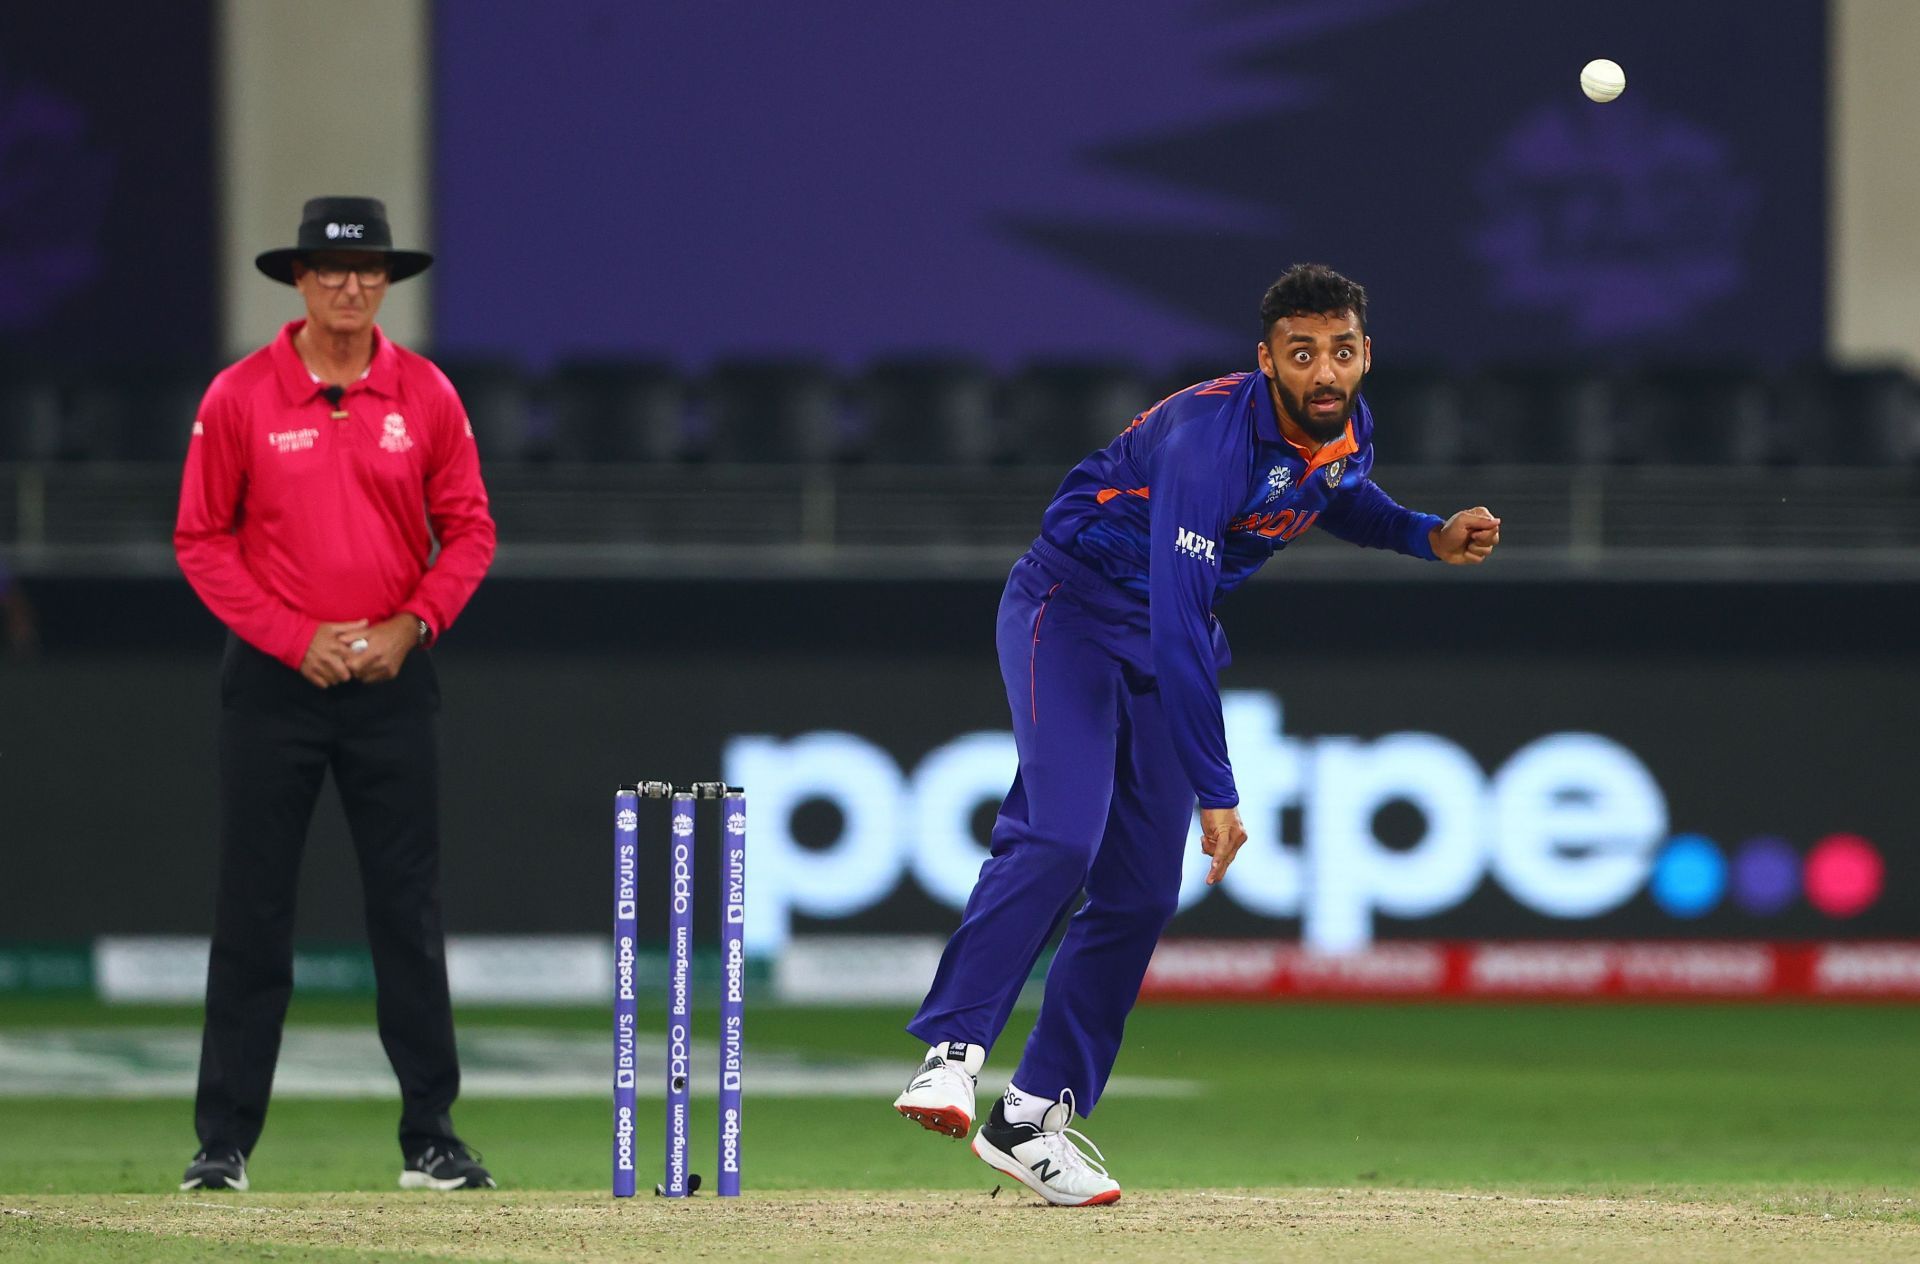 Varun Chakravarthy was dropped after the ICC T20 World Cup 2021